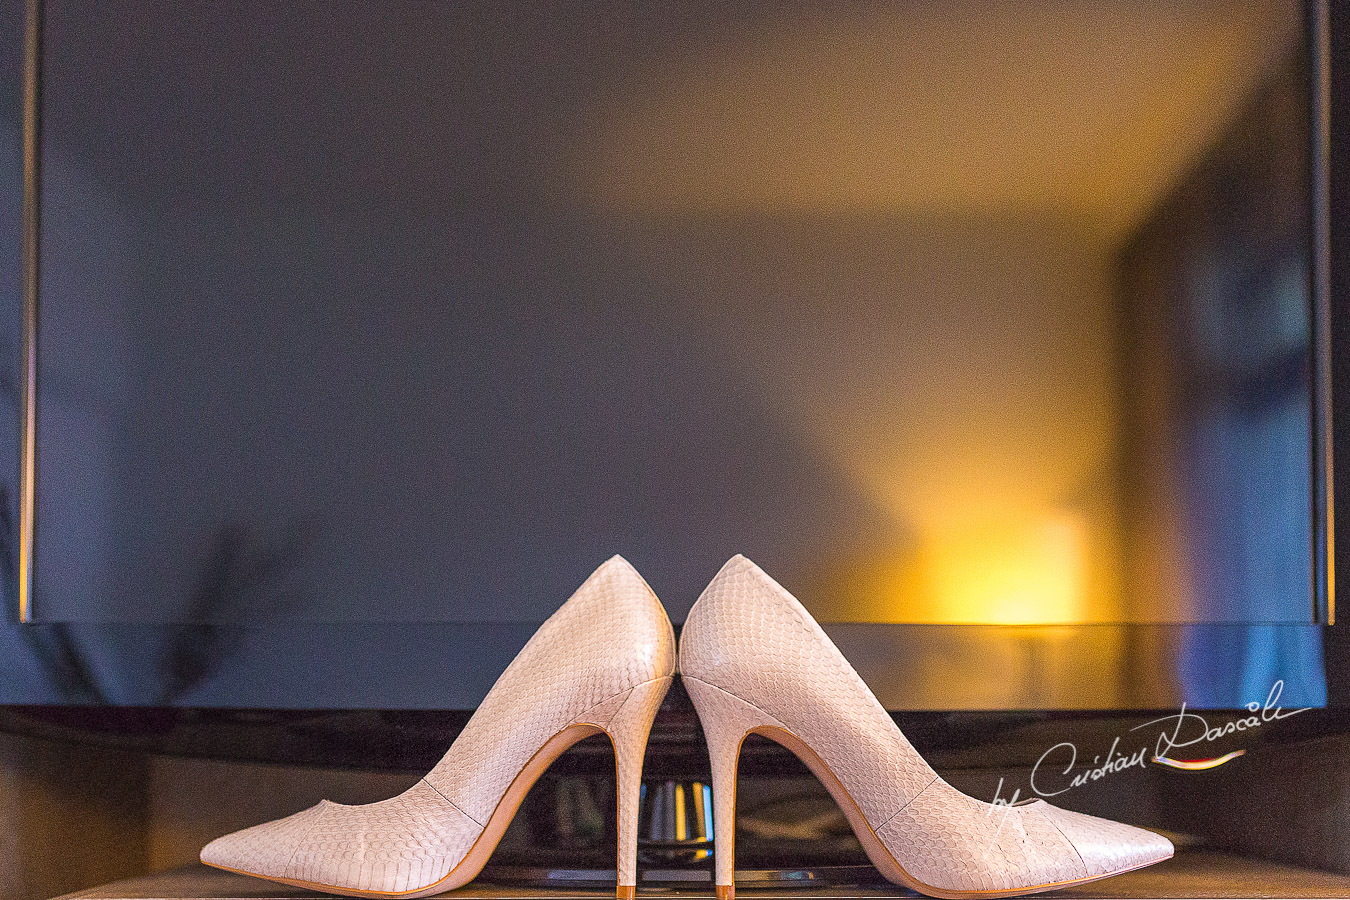 Bride`s shoes captured at Londa Hotel in Limassol, Cyprus.